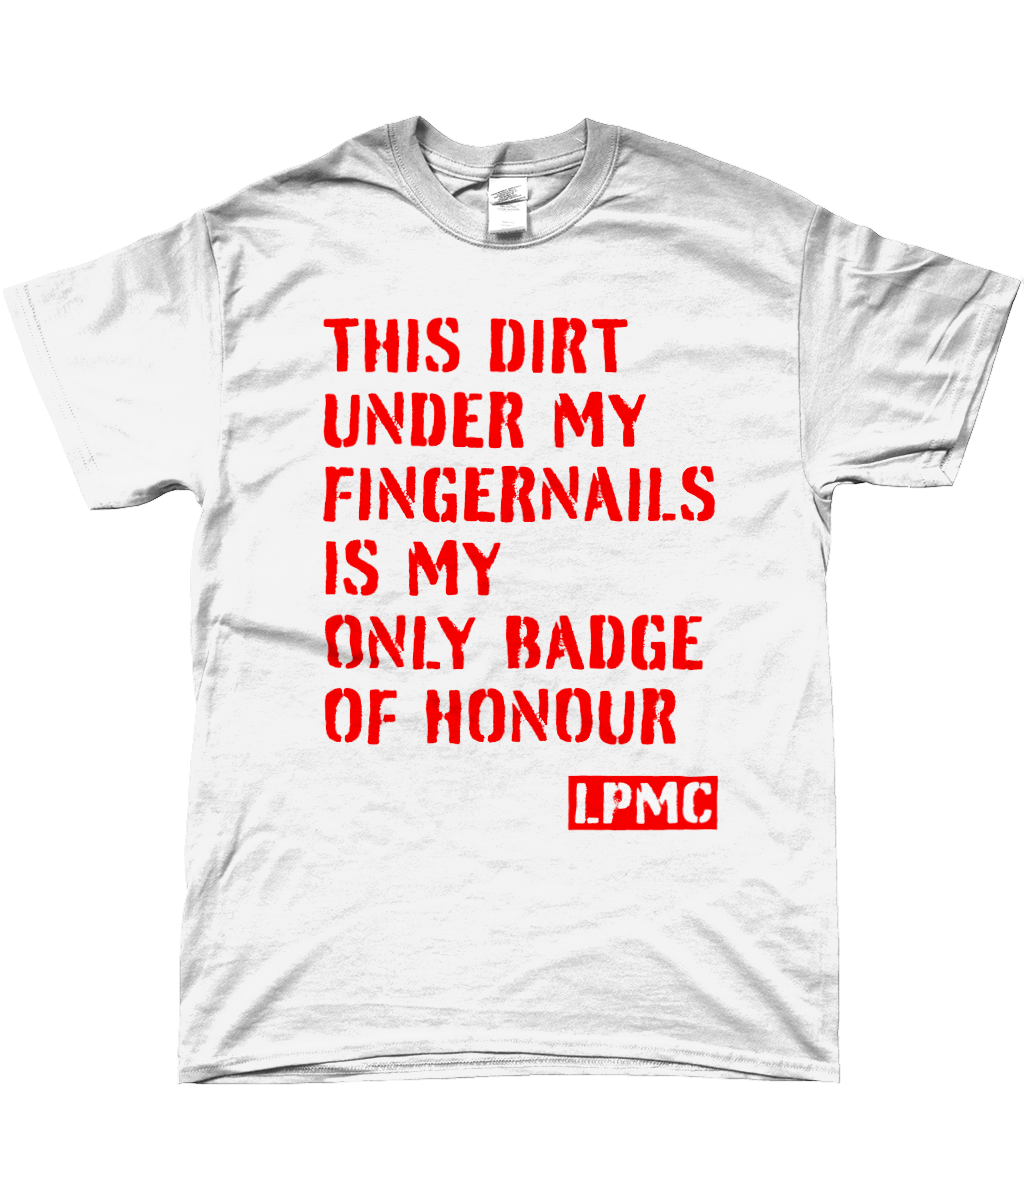 Badge of Honour (Red Text)